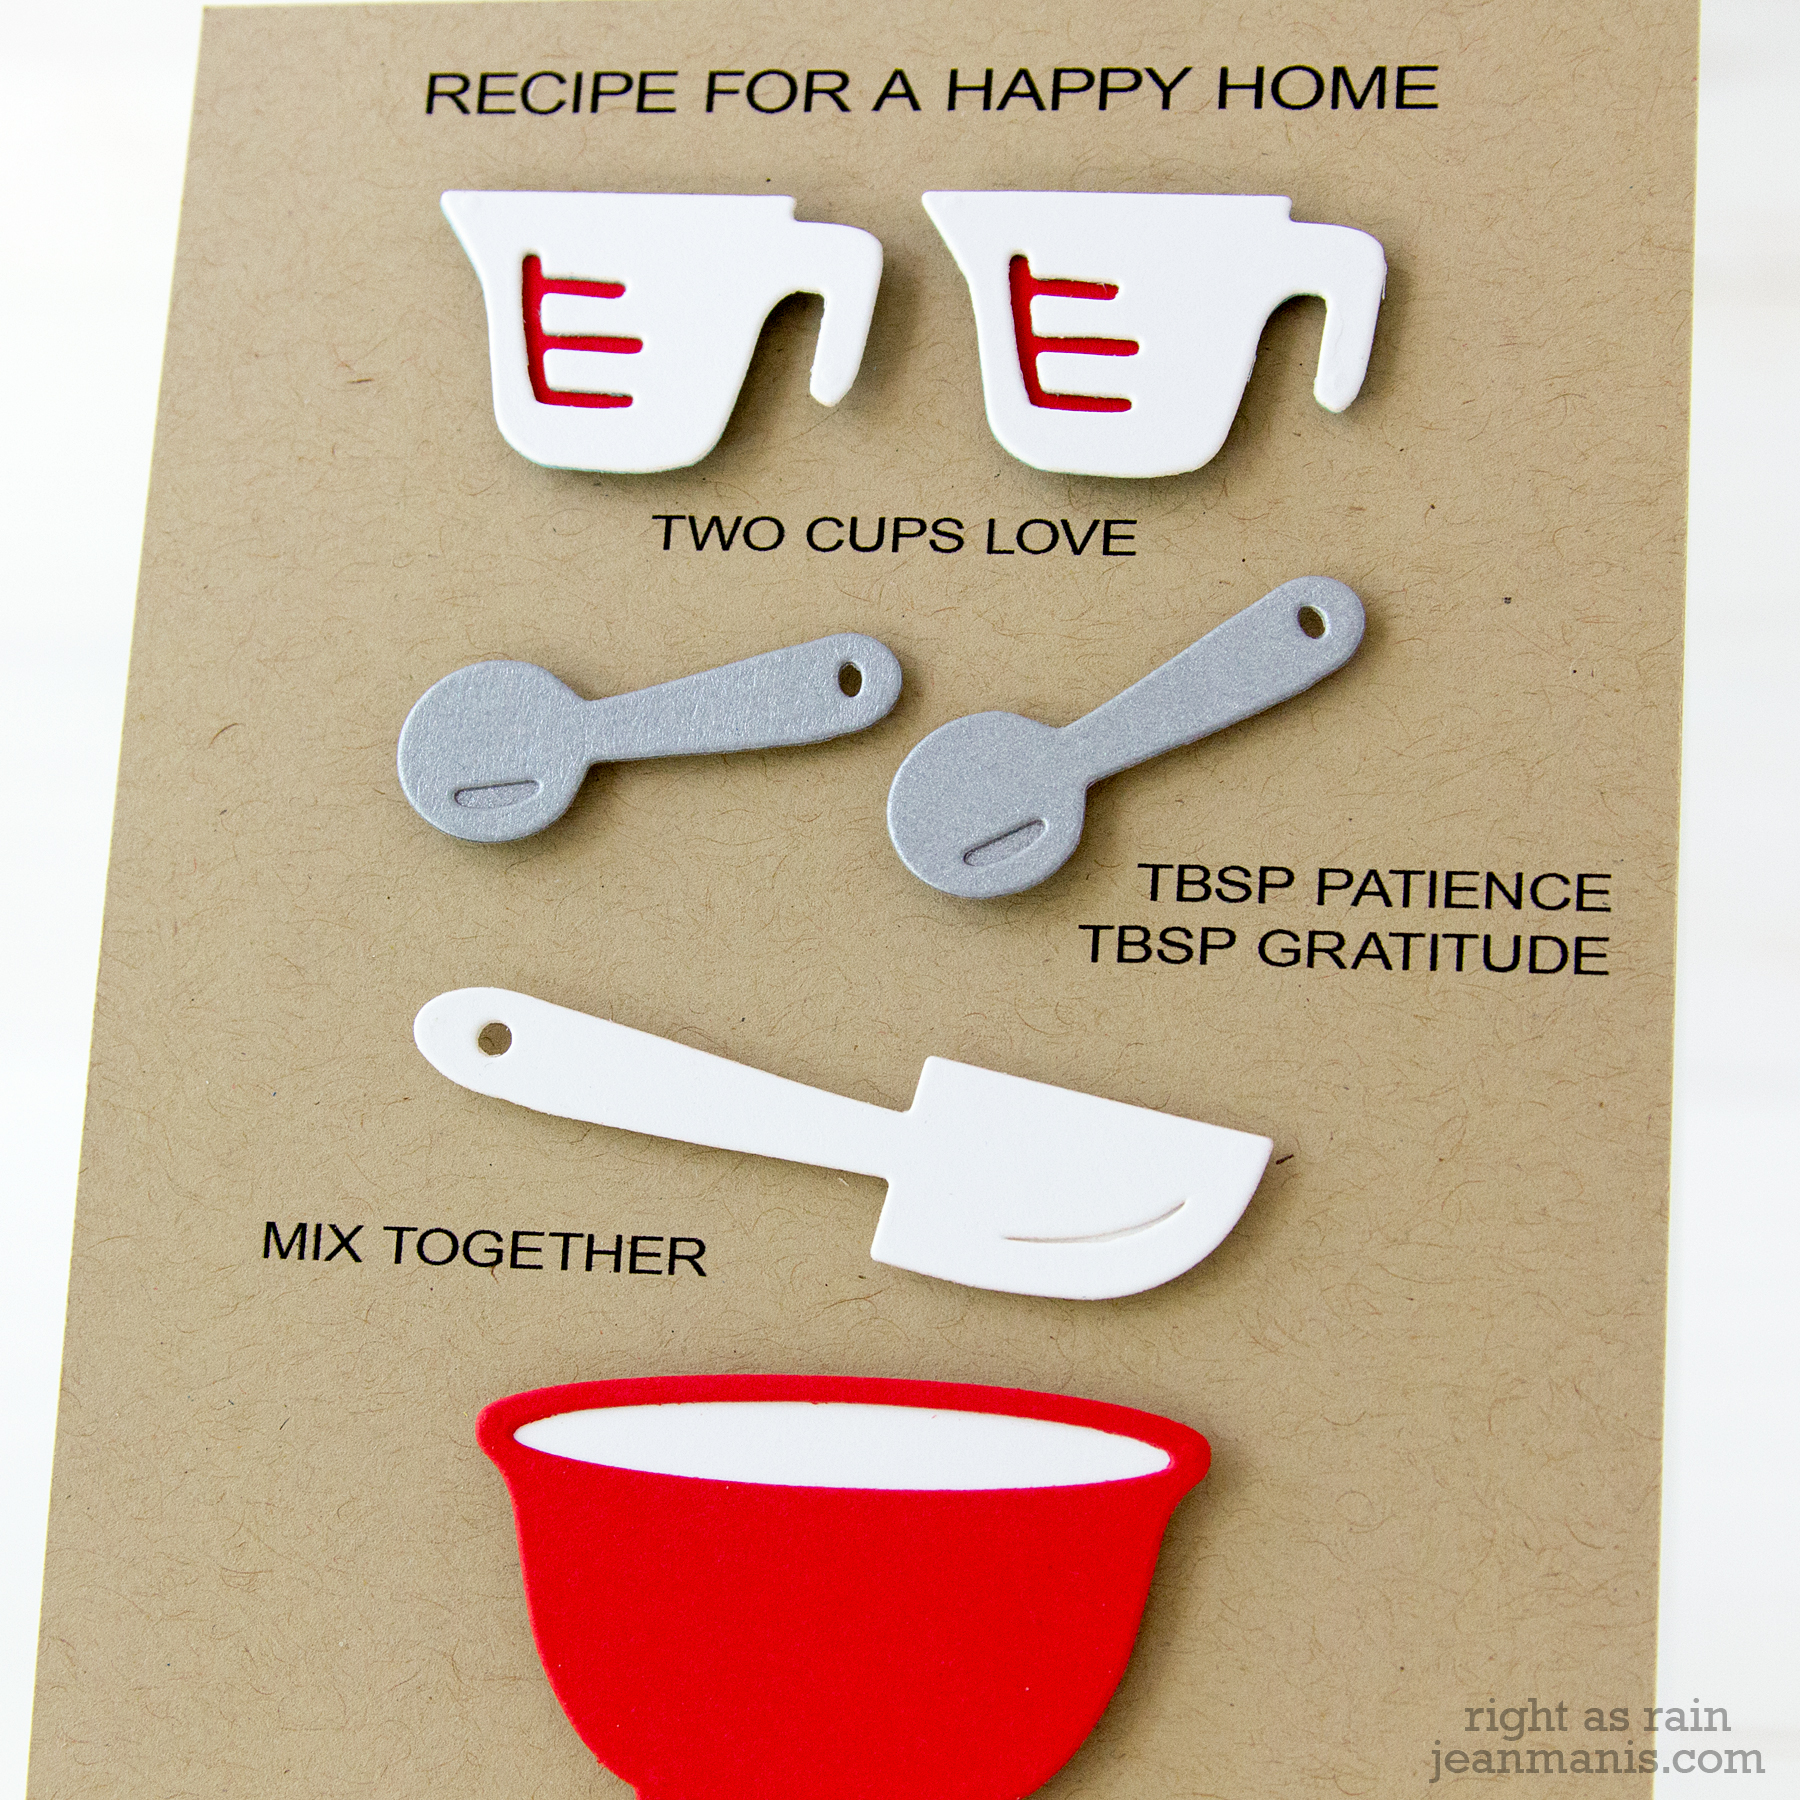 Recipe for a Happy Home - Spellbinders Let's Bake